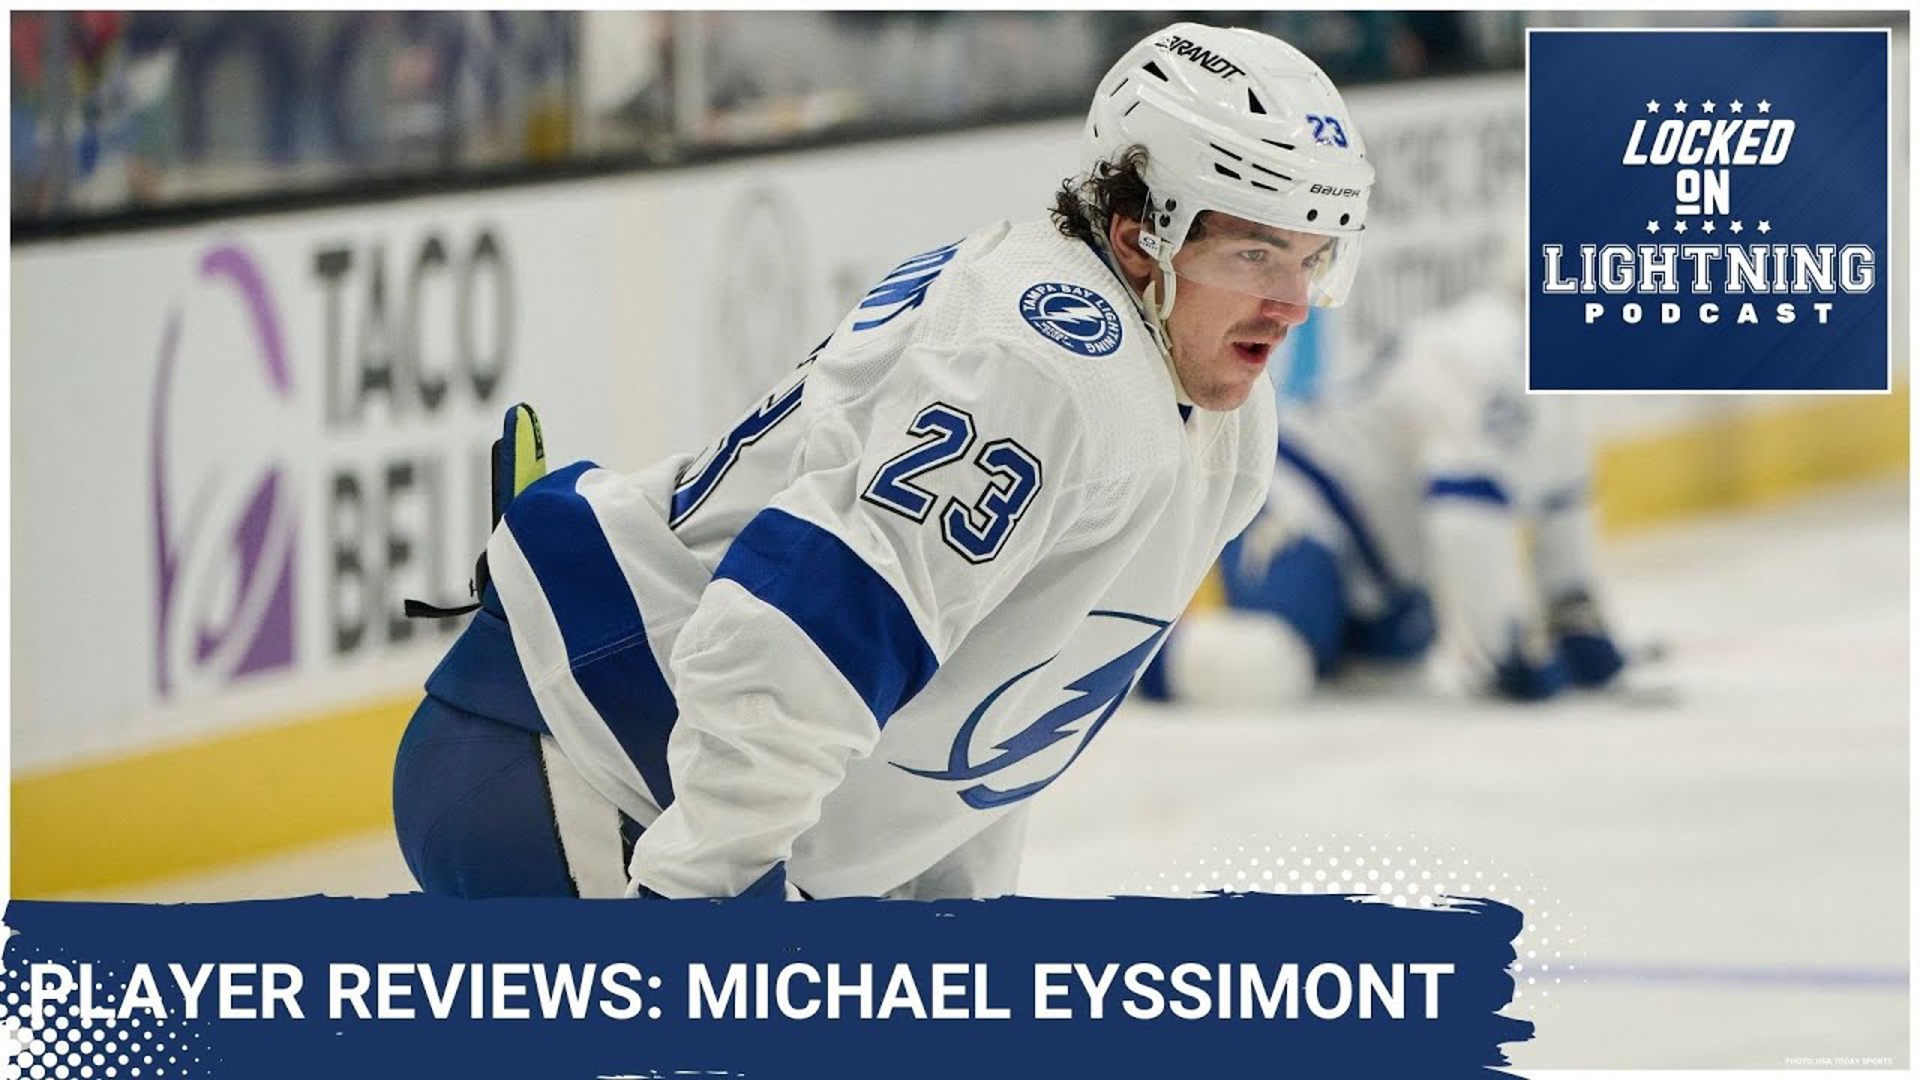 After taking a brief hiatus, we are back at it with out player reviews, and today we will take a a look at season of Michael Eyssimont.